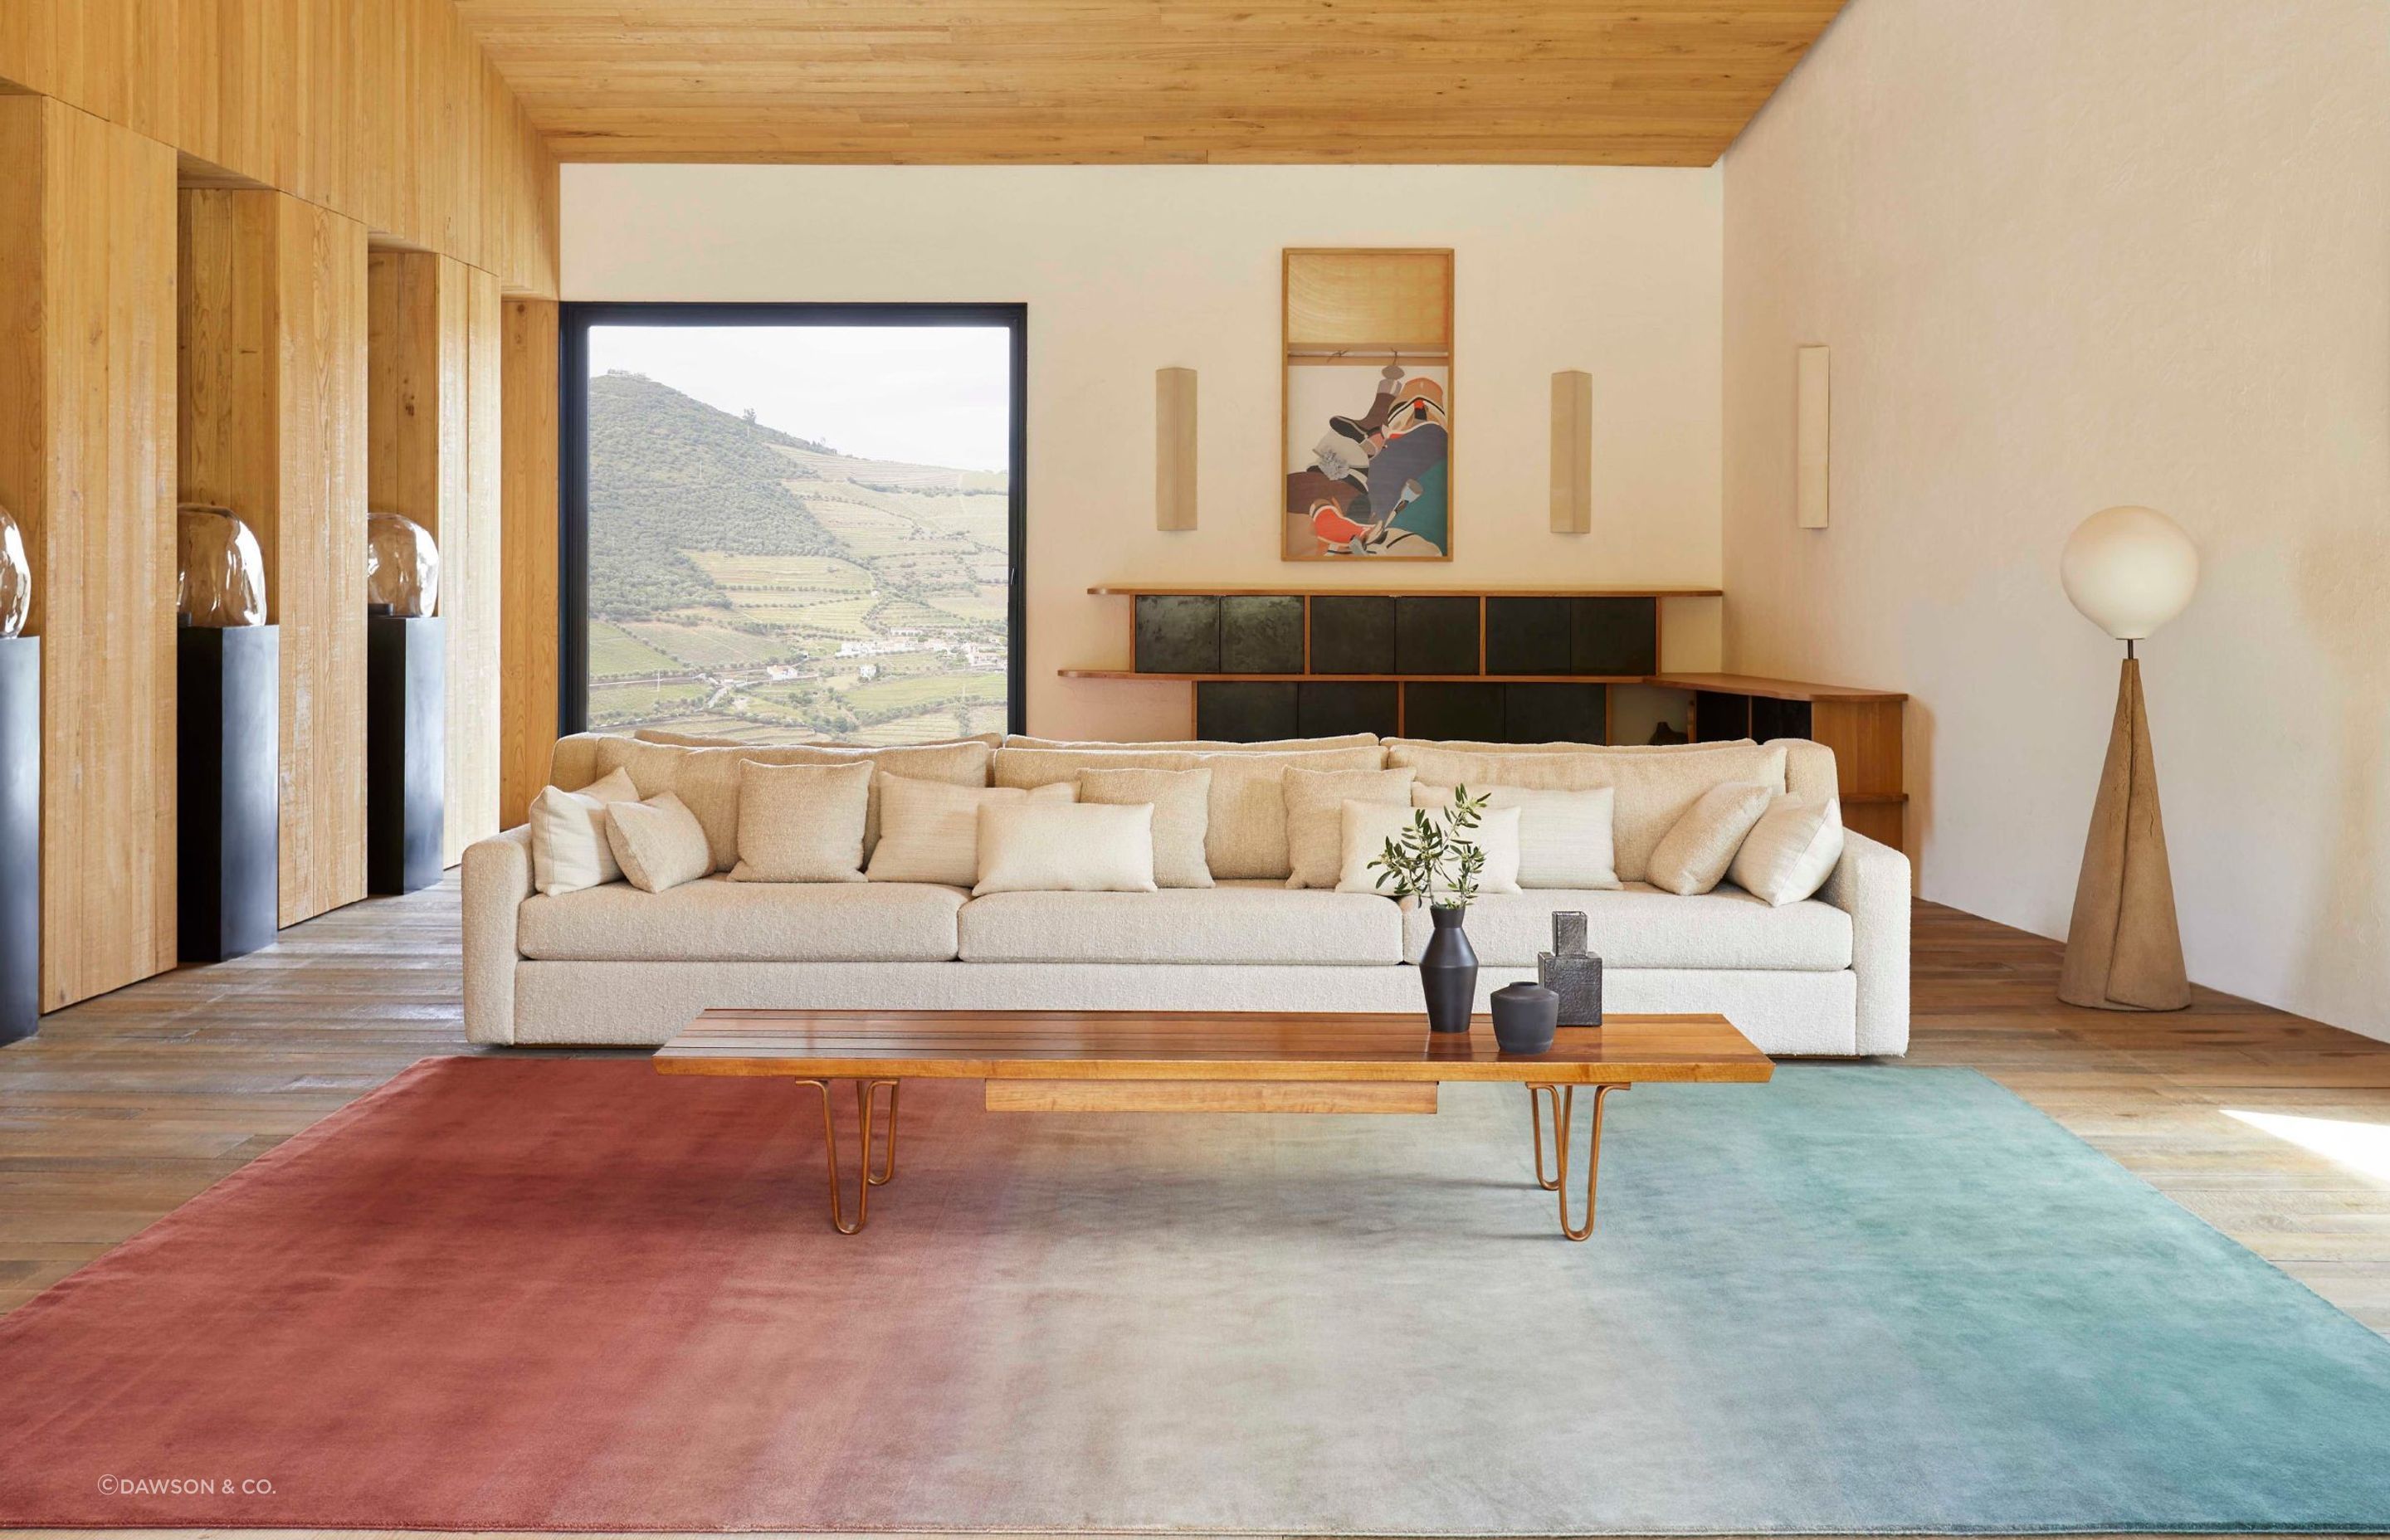 A quality choice like the Degrade Rug by Patricia Urquiola can effortlessly elevate a living room.